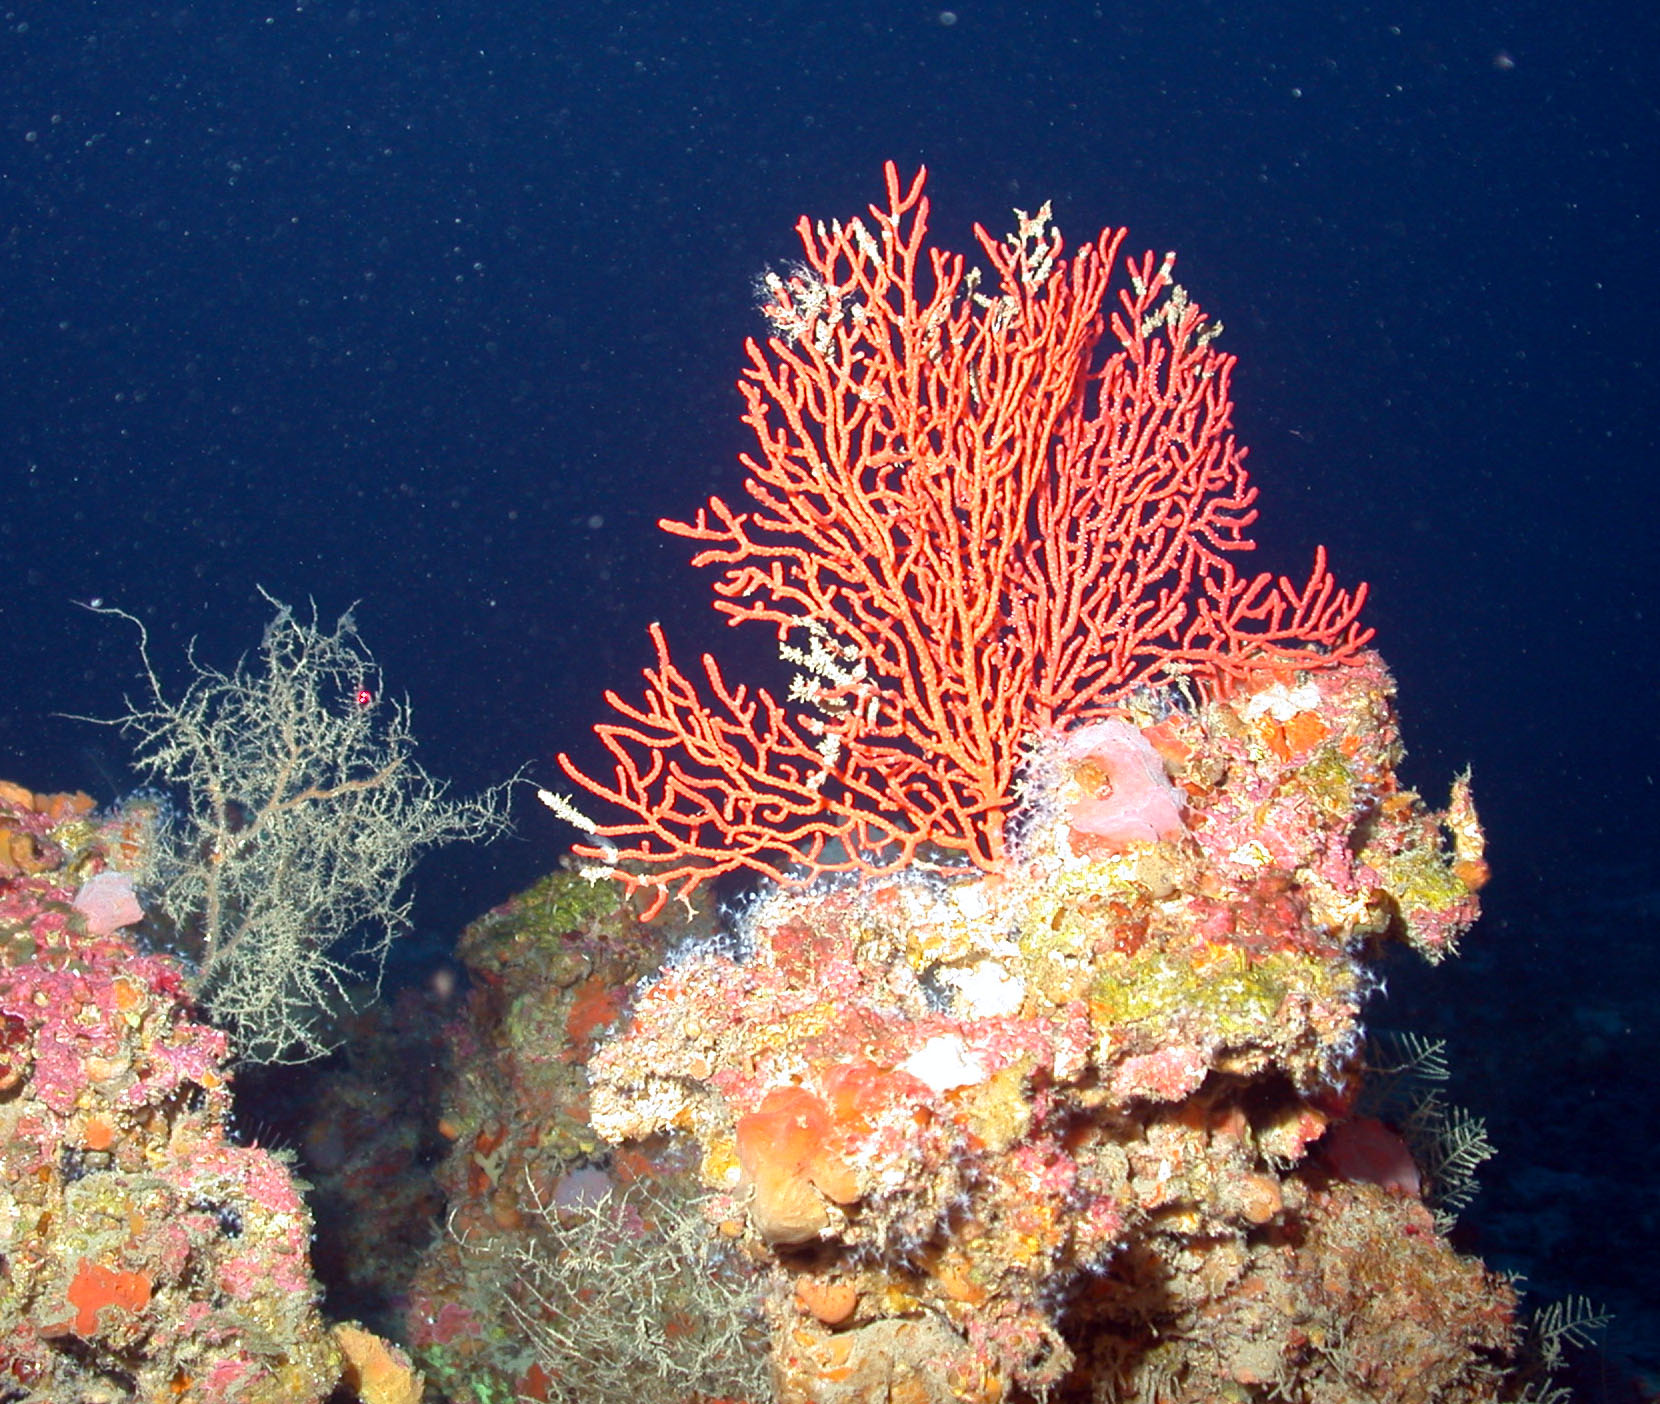 Red, fan-shaped coral colony sitting atop a rock covered in sponges and anemones.  The water around it is deep, dark blue because of the depth.